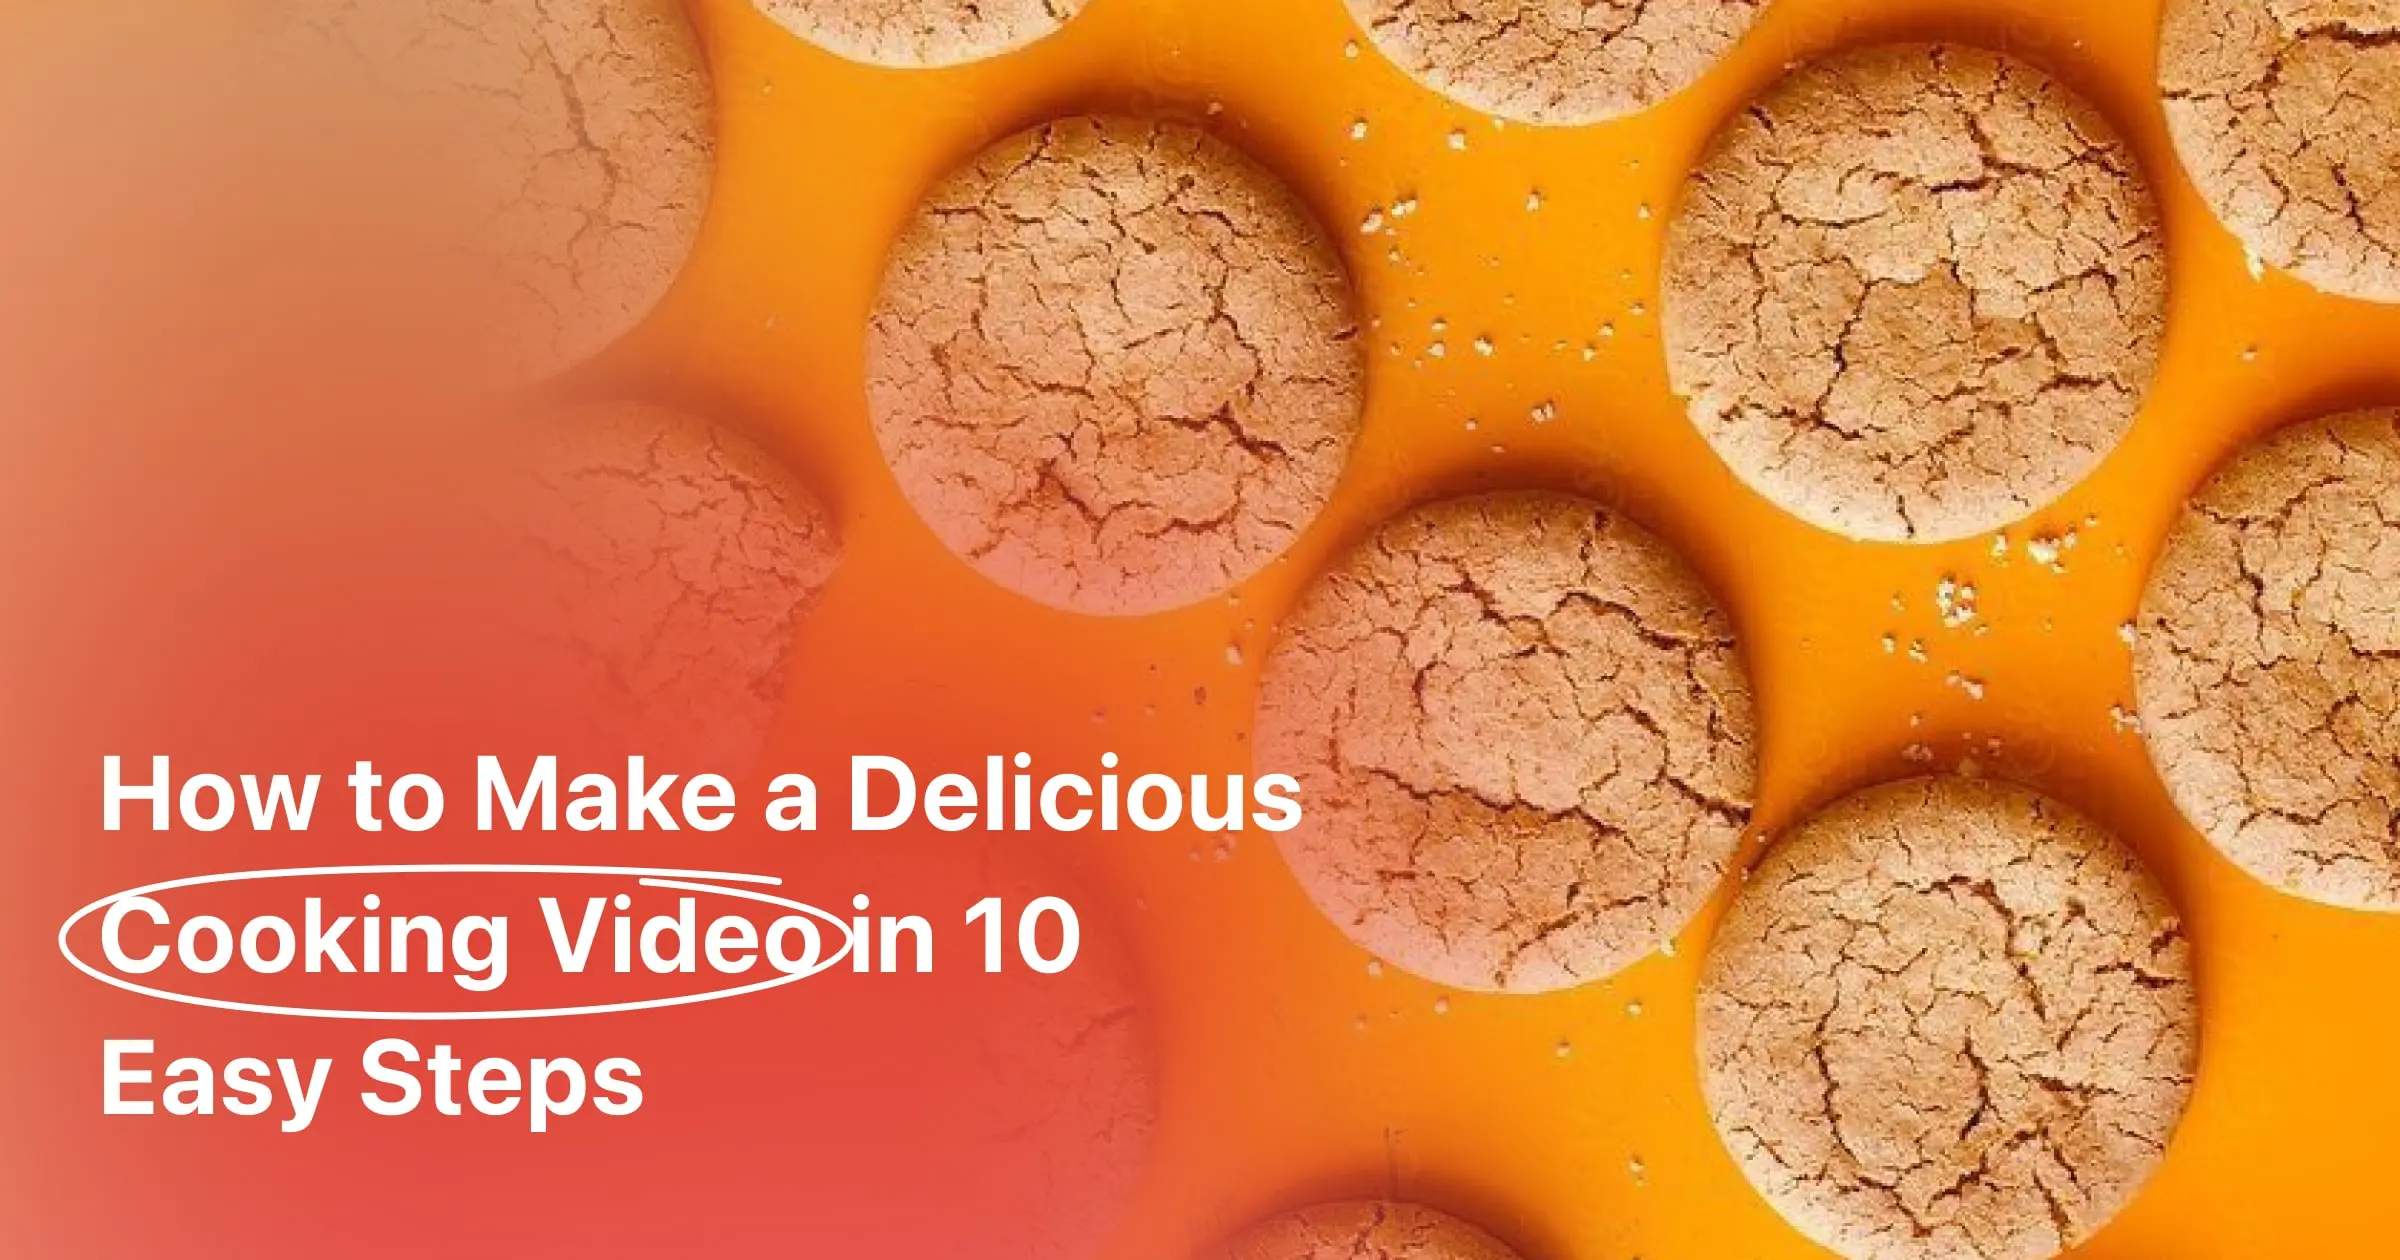 How to Make a Delicious Cooking Video in 10 Easy Steps